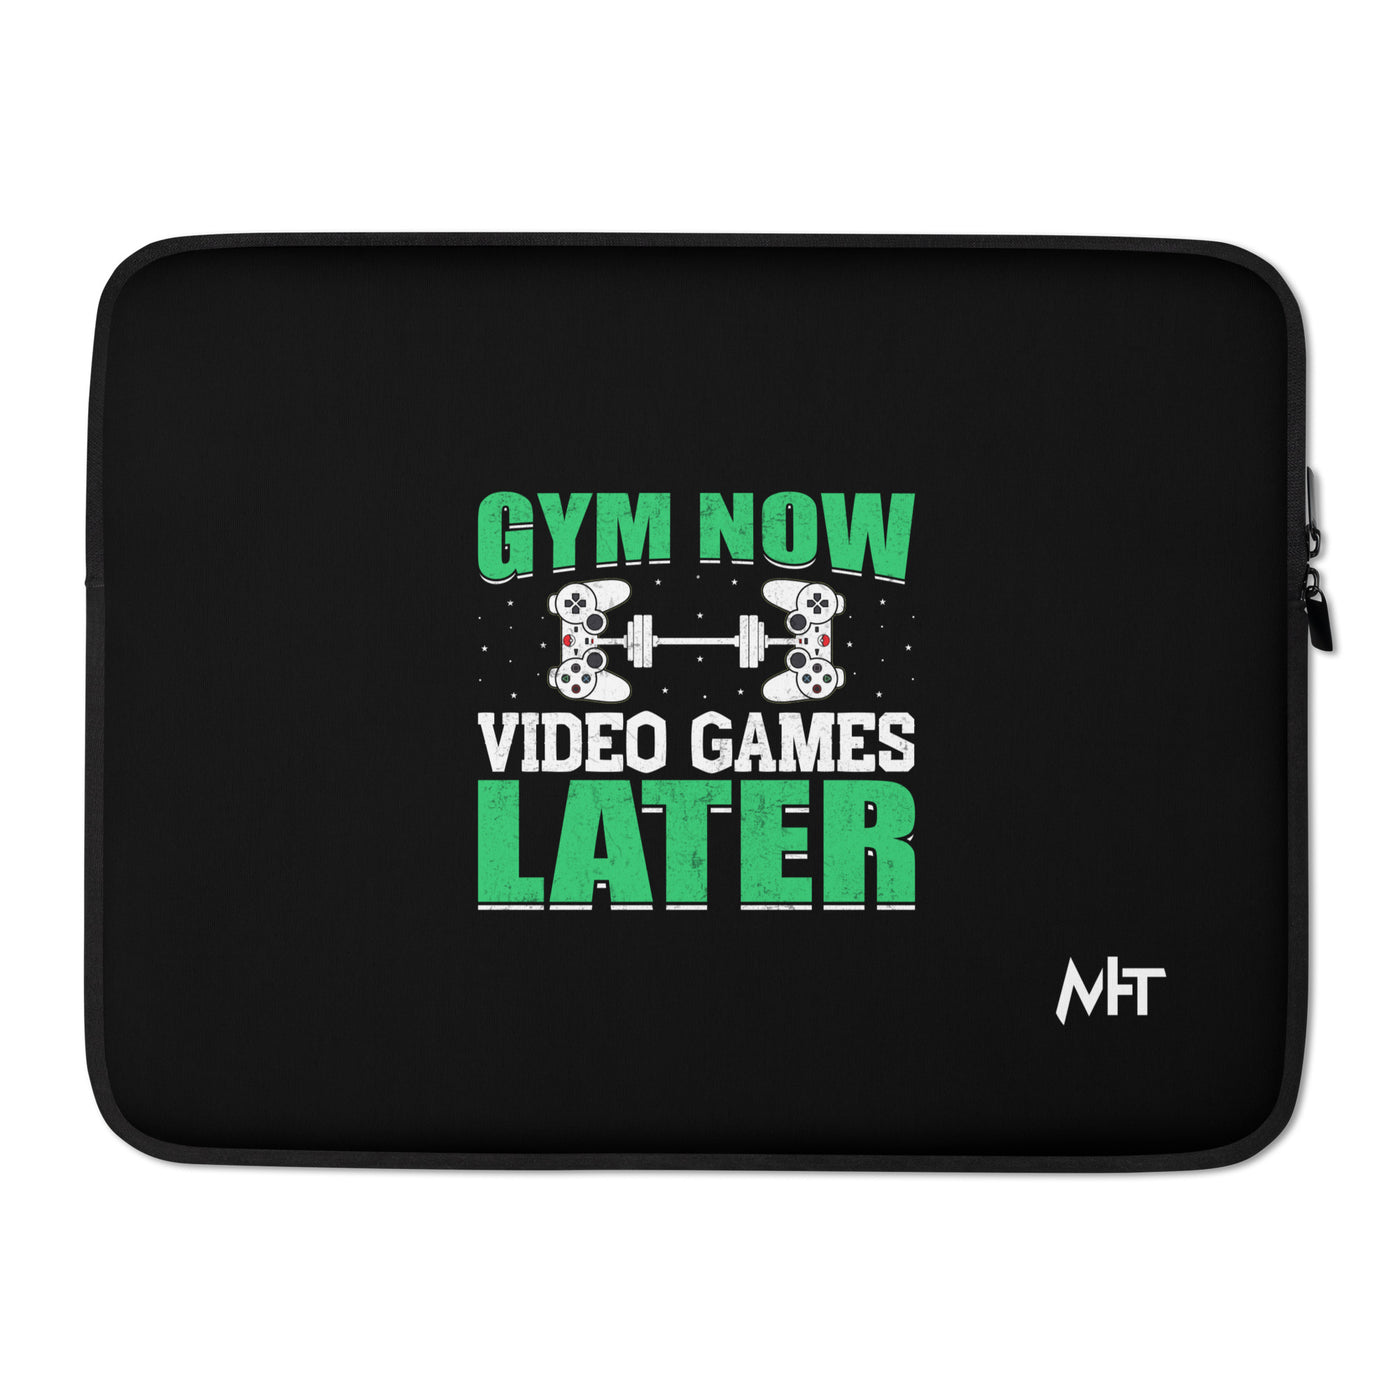 Gym now, Video Games Later - Laptop Sleeve